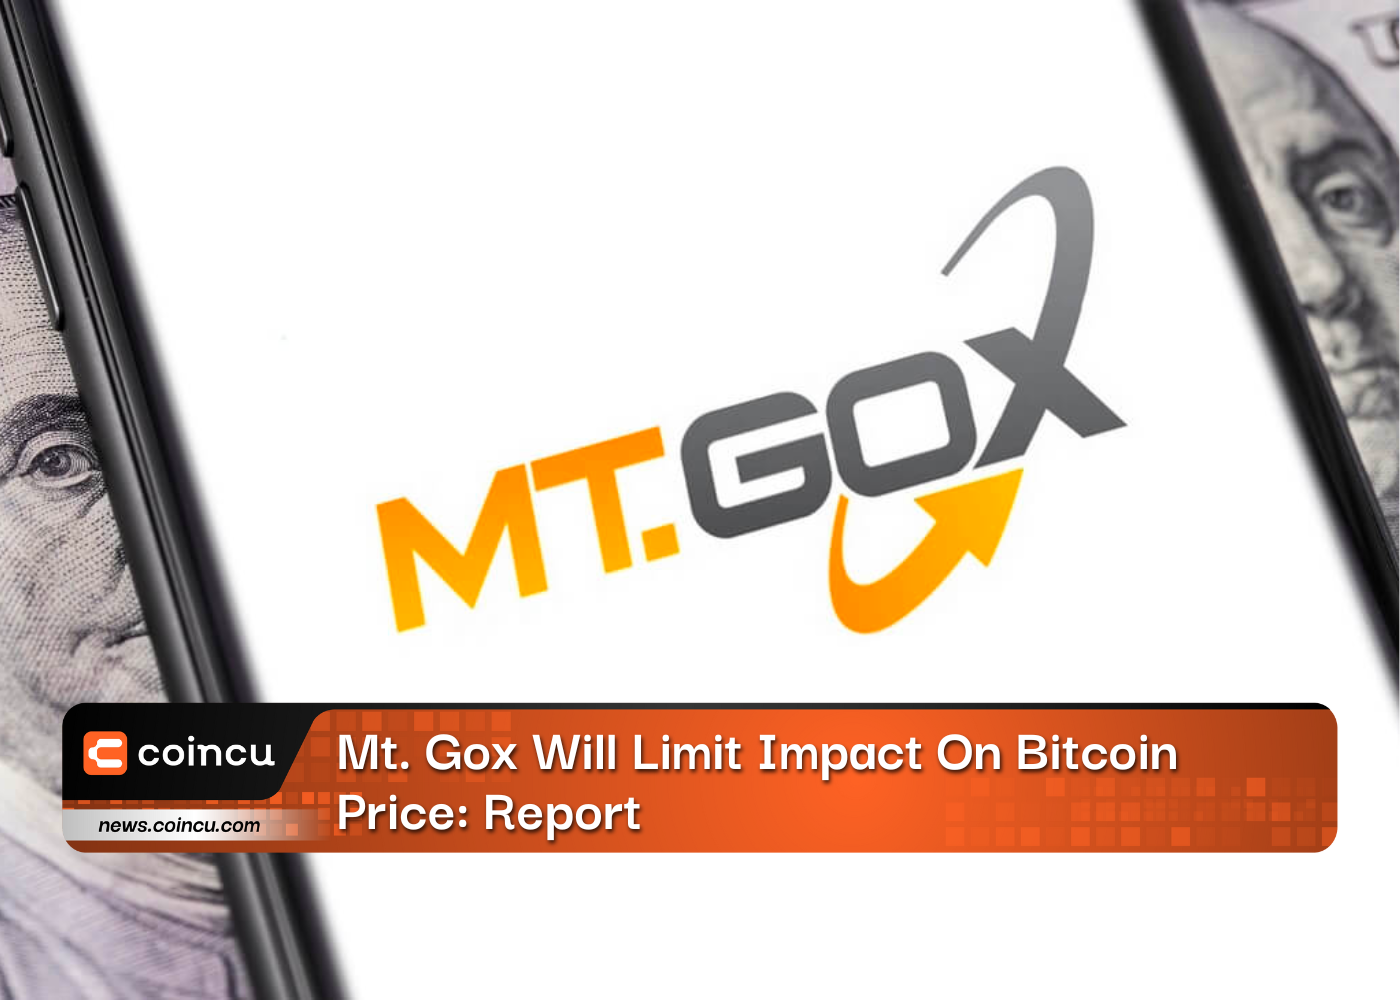 Mt. Gox Will Limit Impact On Bitcoin Price: Report